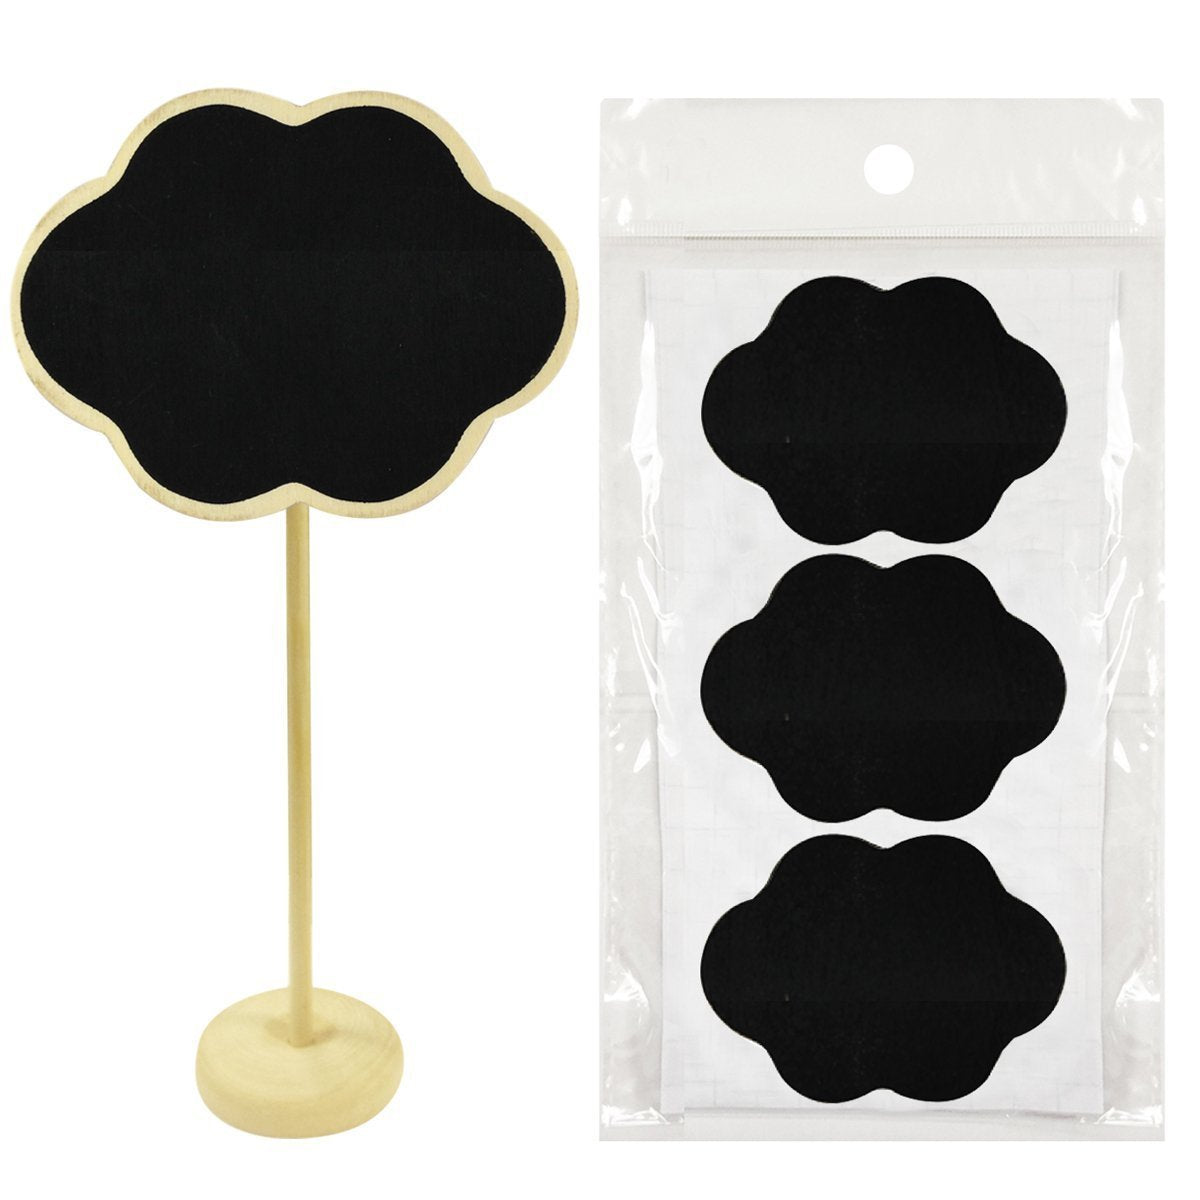 Set of 8 Chalkboard Stands With Chalkboard Stickers, 3.25" x 2.5" Cloud